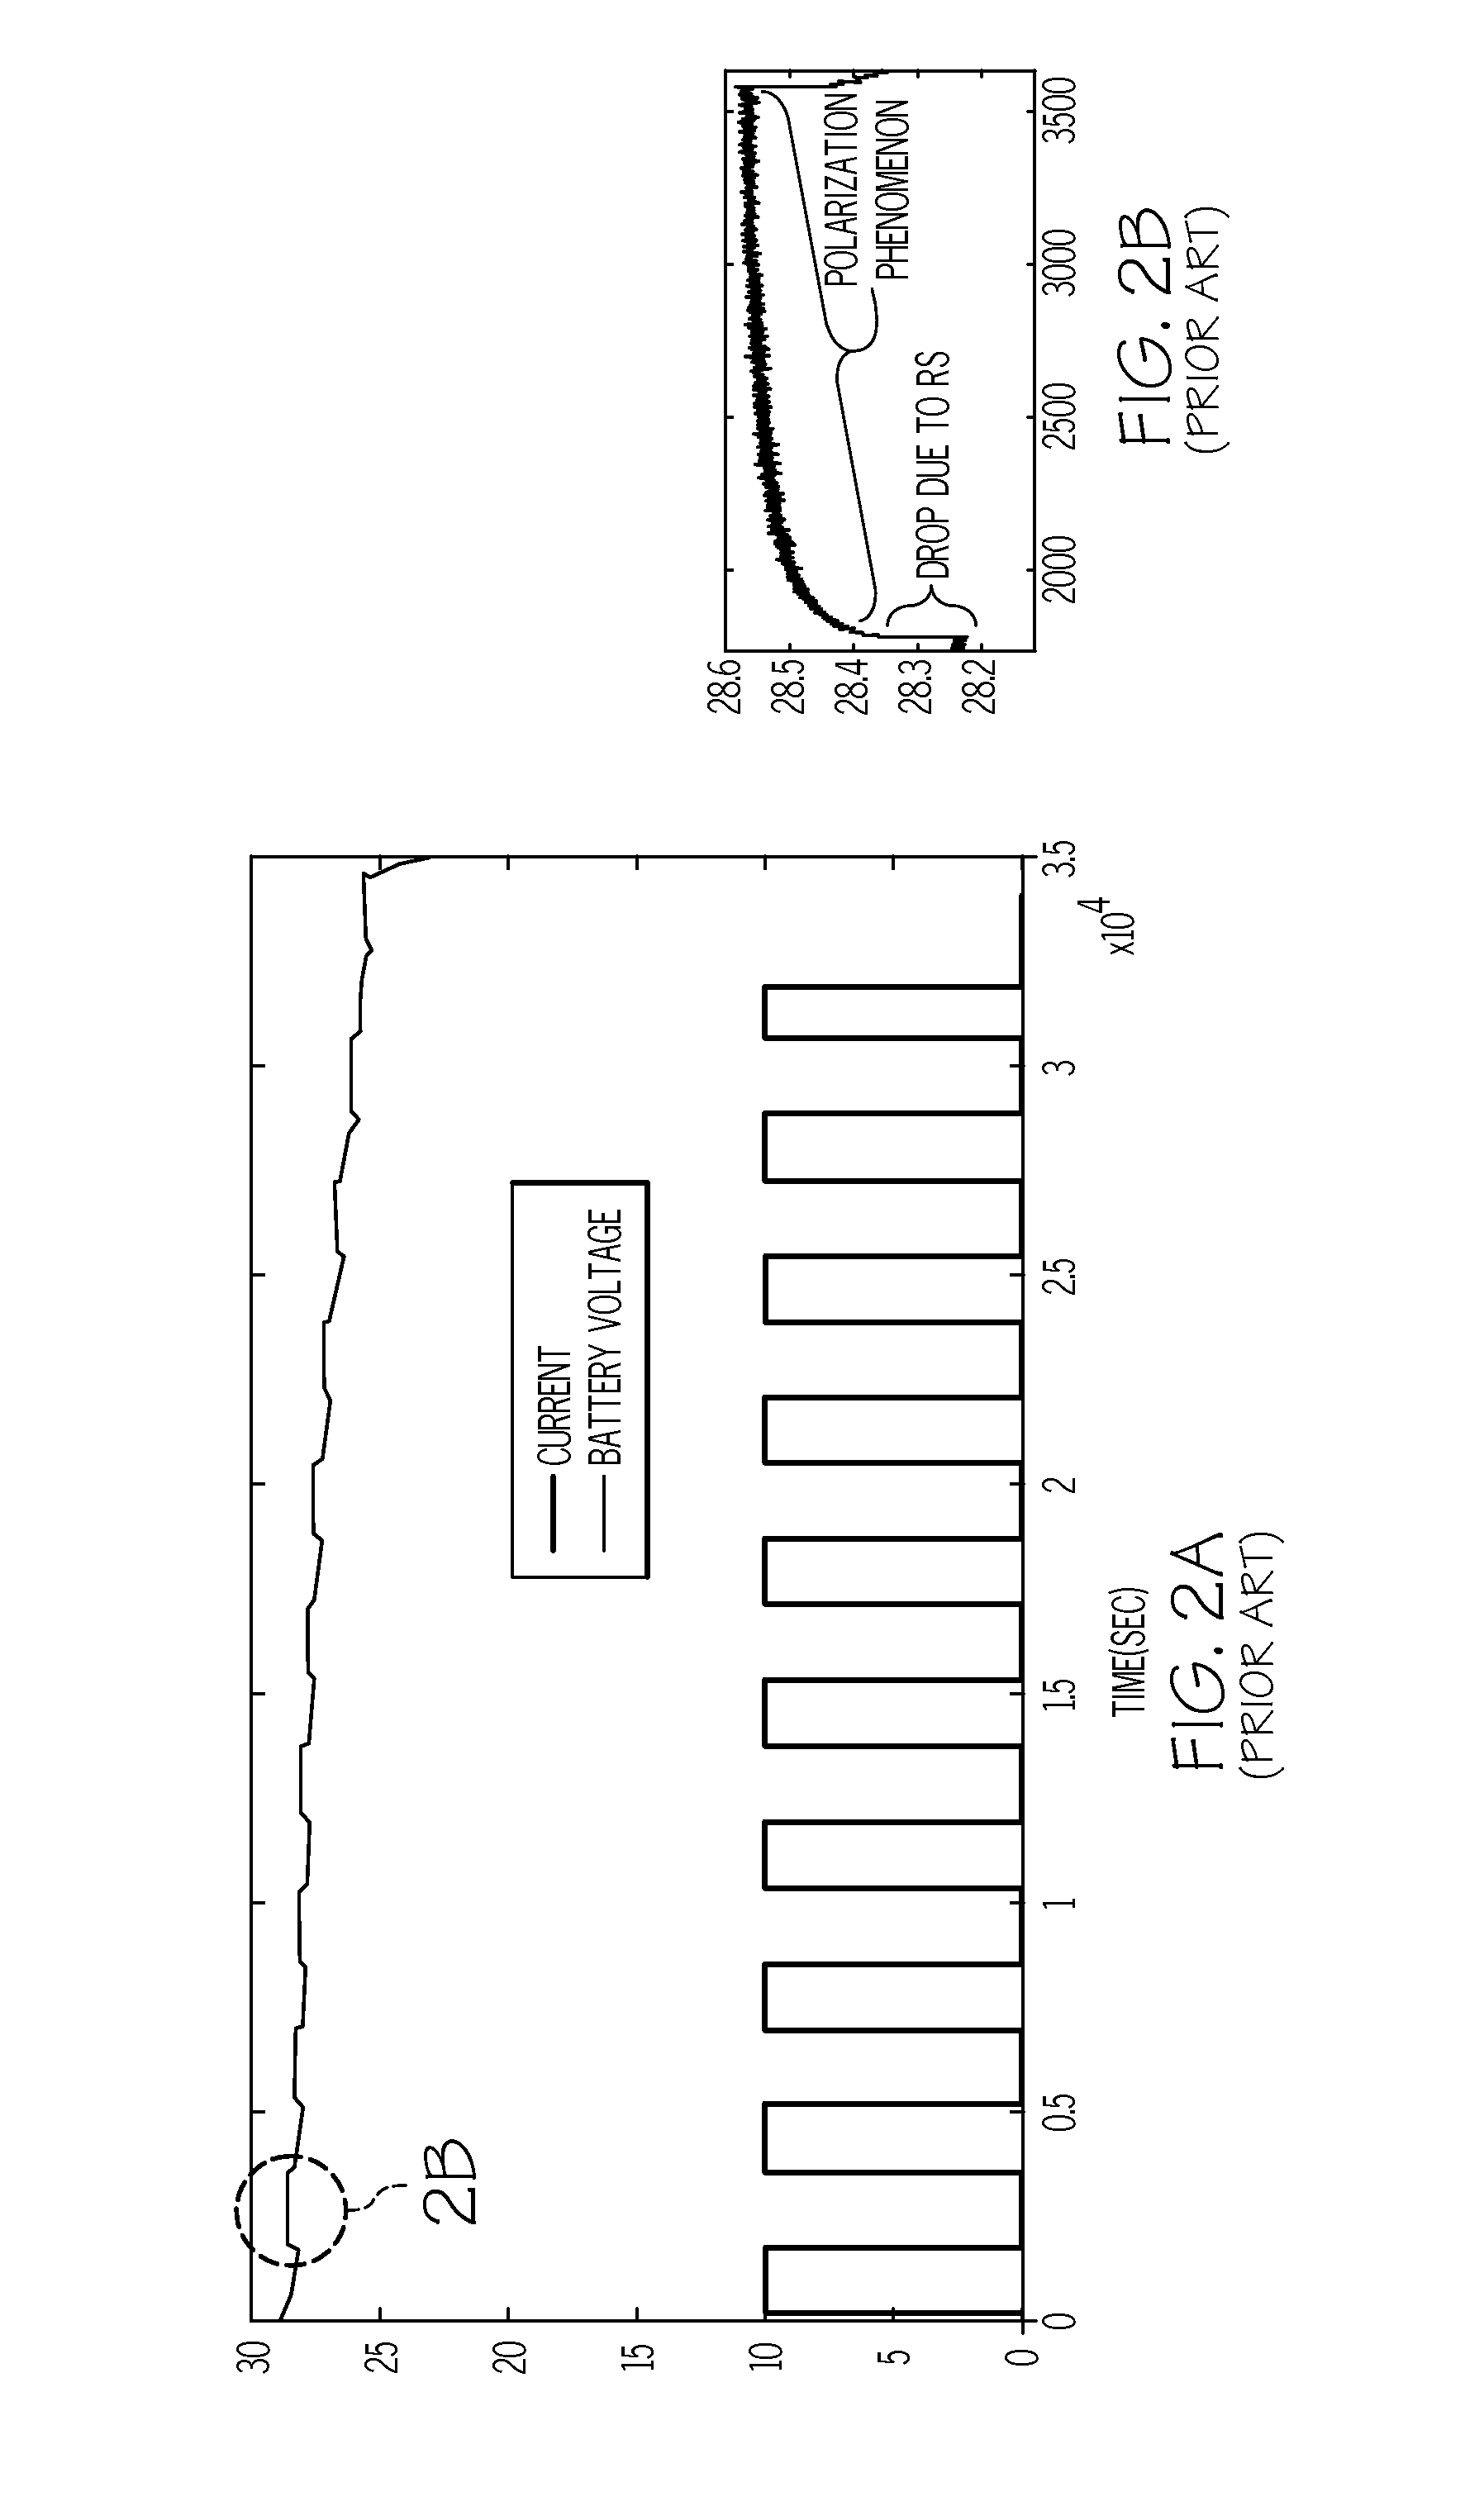 Method and apparatus for online determination of battery state of charge and state of health